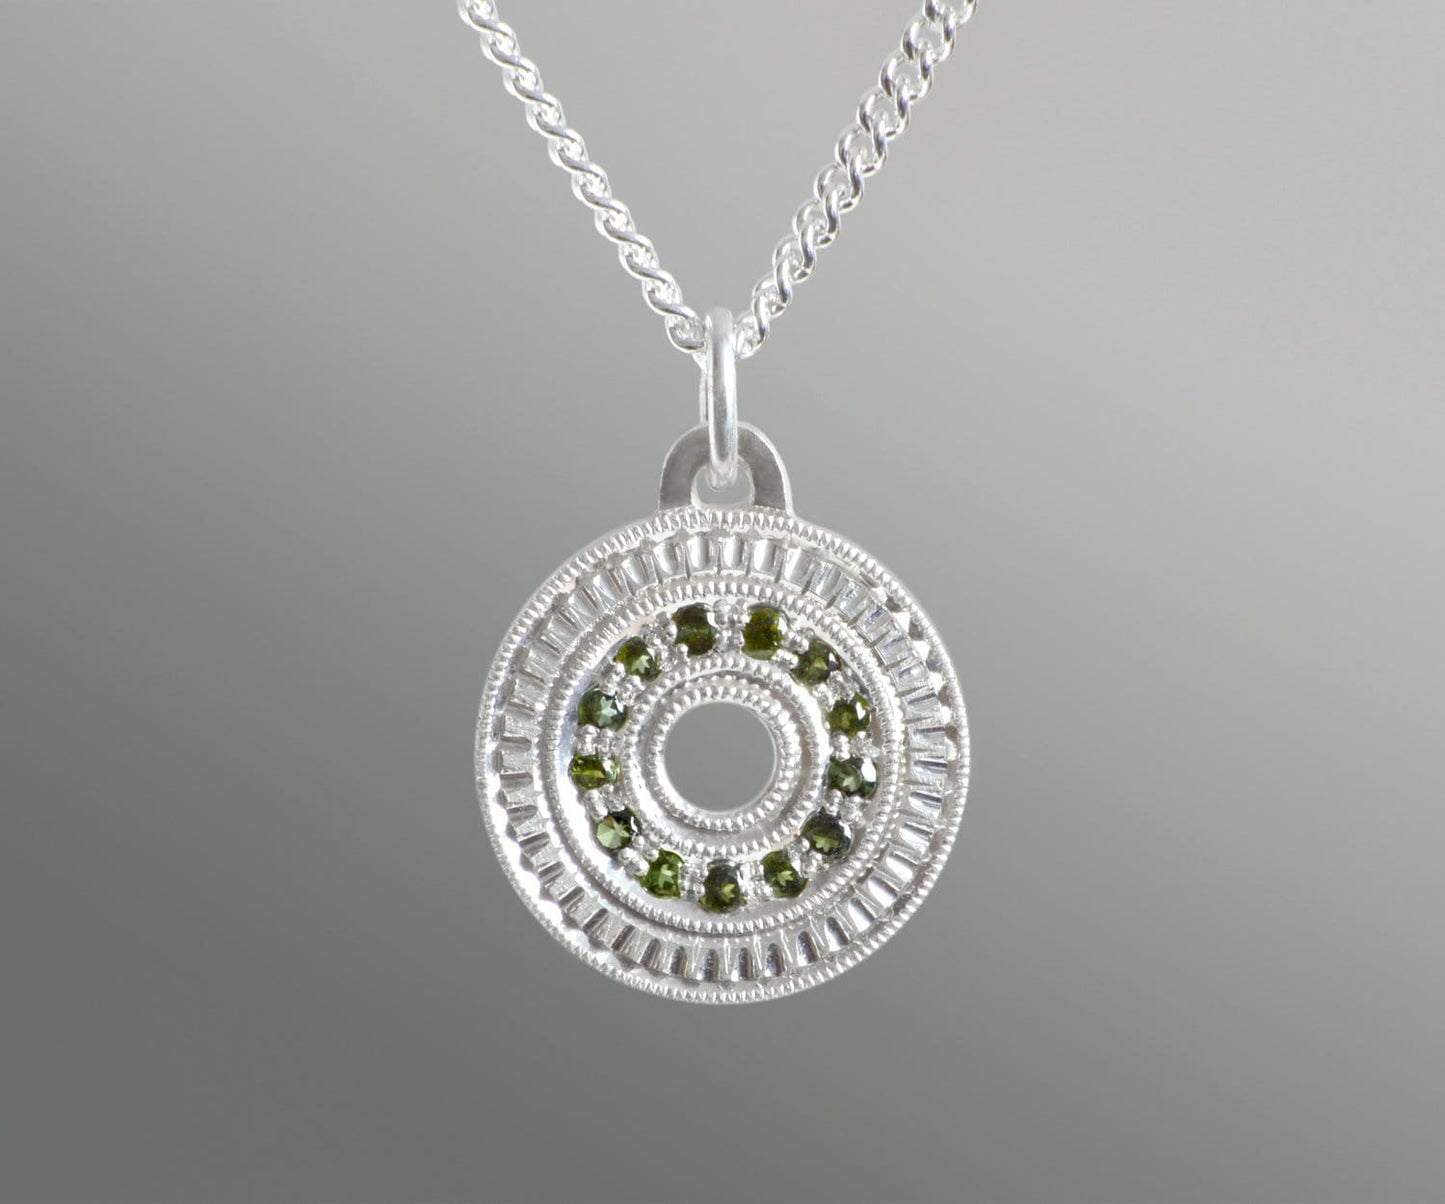 Eternity Green Tourmaline Necklace in Sterling Silver, Pave Tourmaline Necklace, October Birthstone Necklace